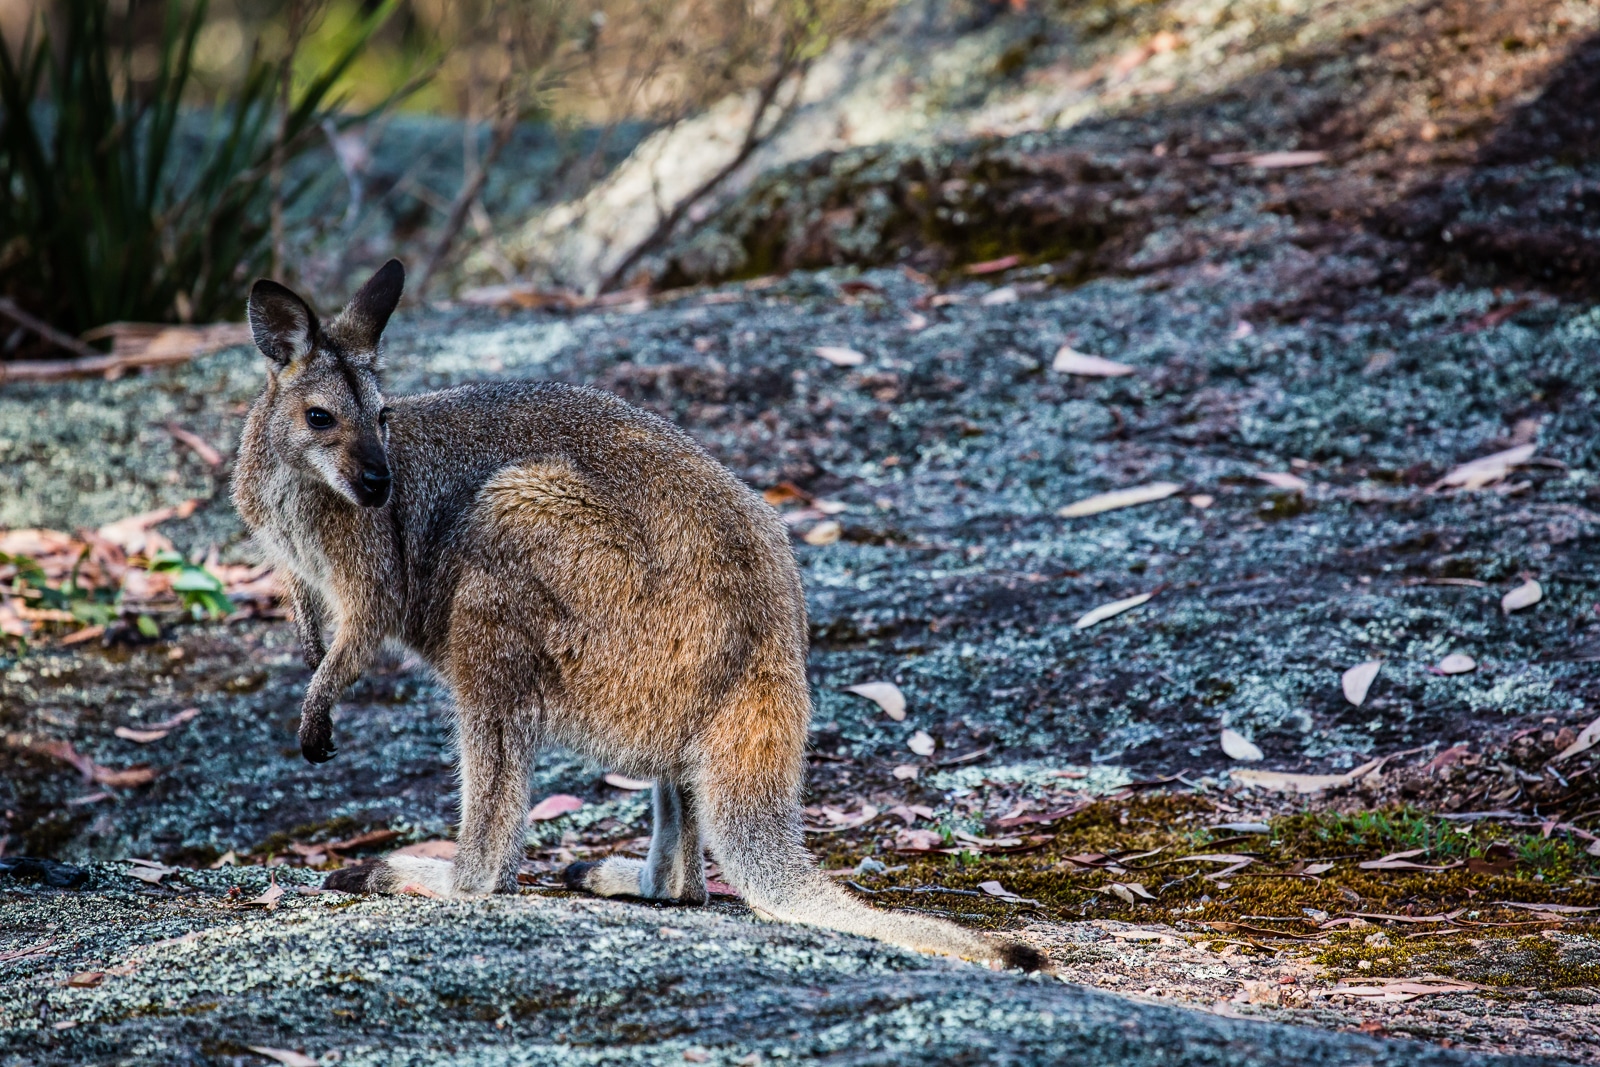 Swamp Wallaby hanging around on the rocks around the campsite